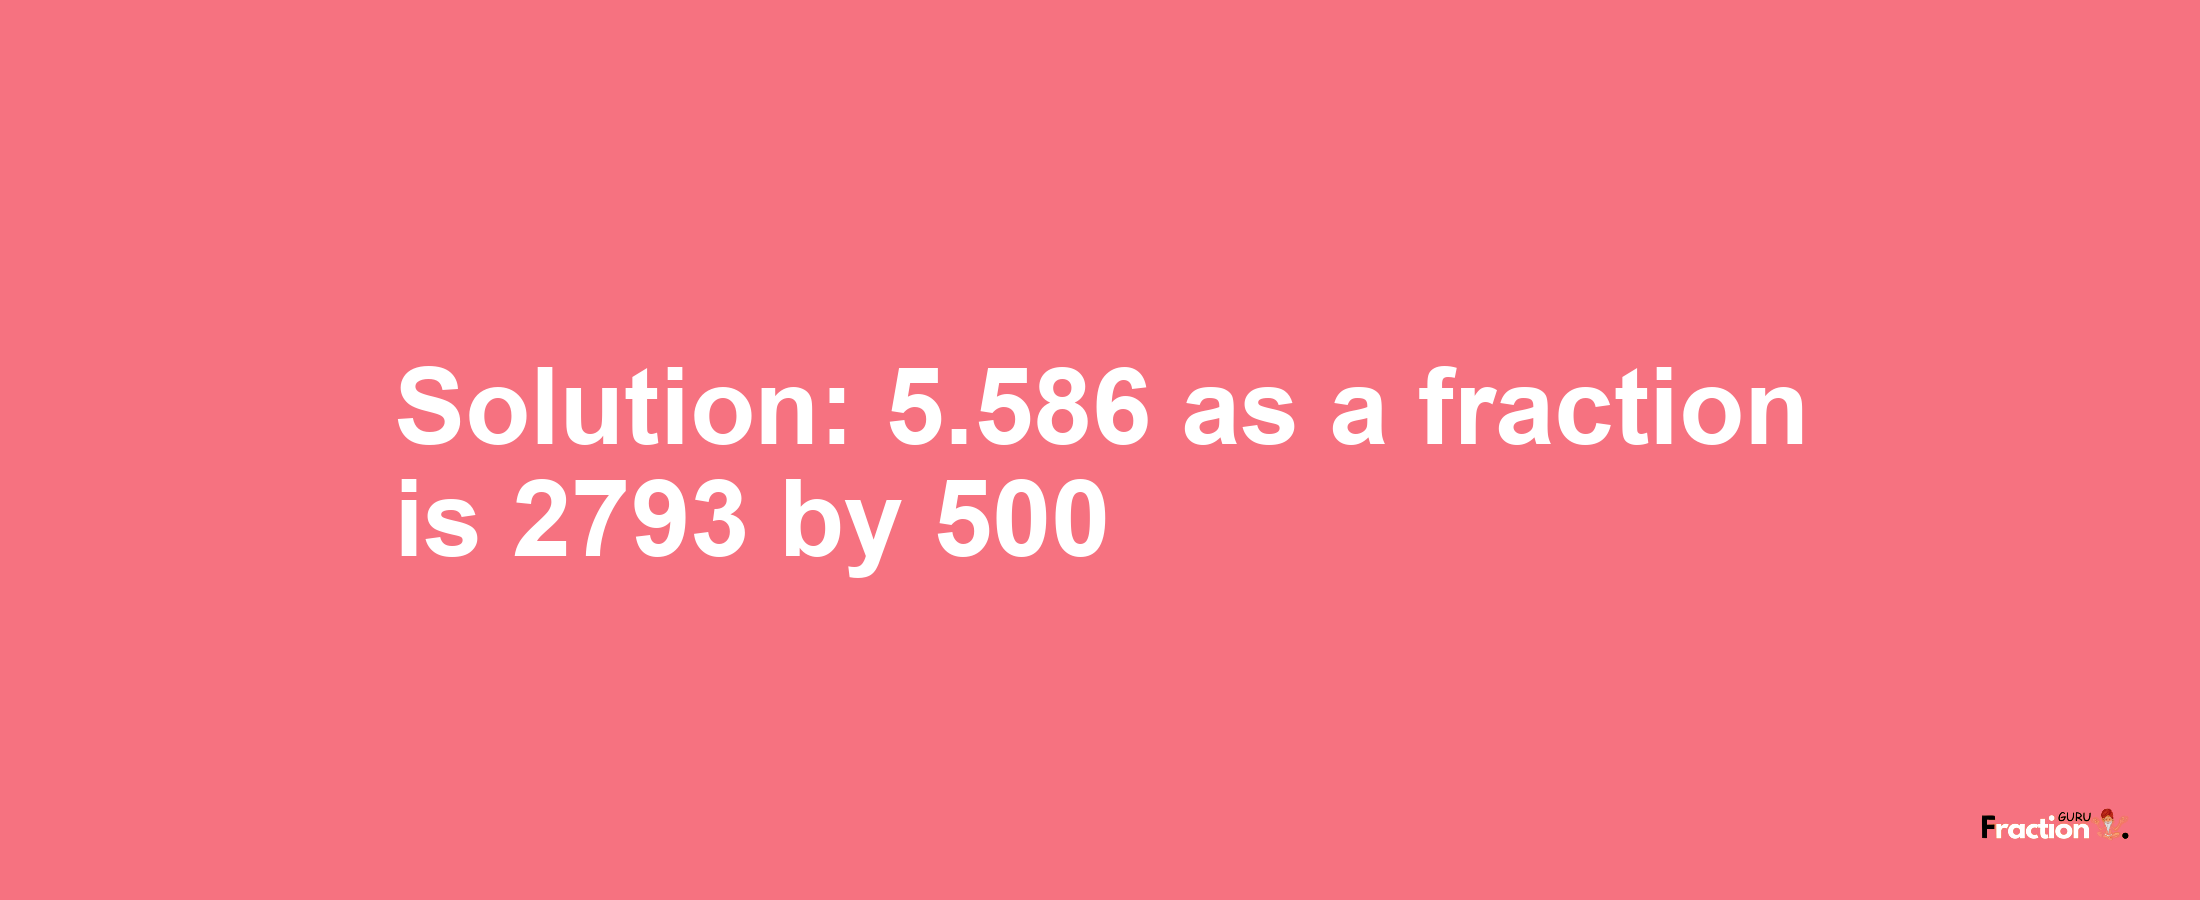 Solution:5.586 as a fraction is 2793/500